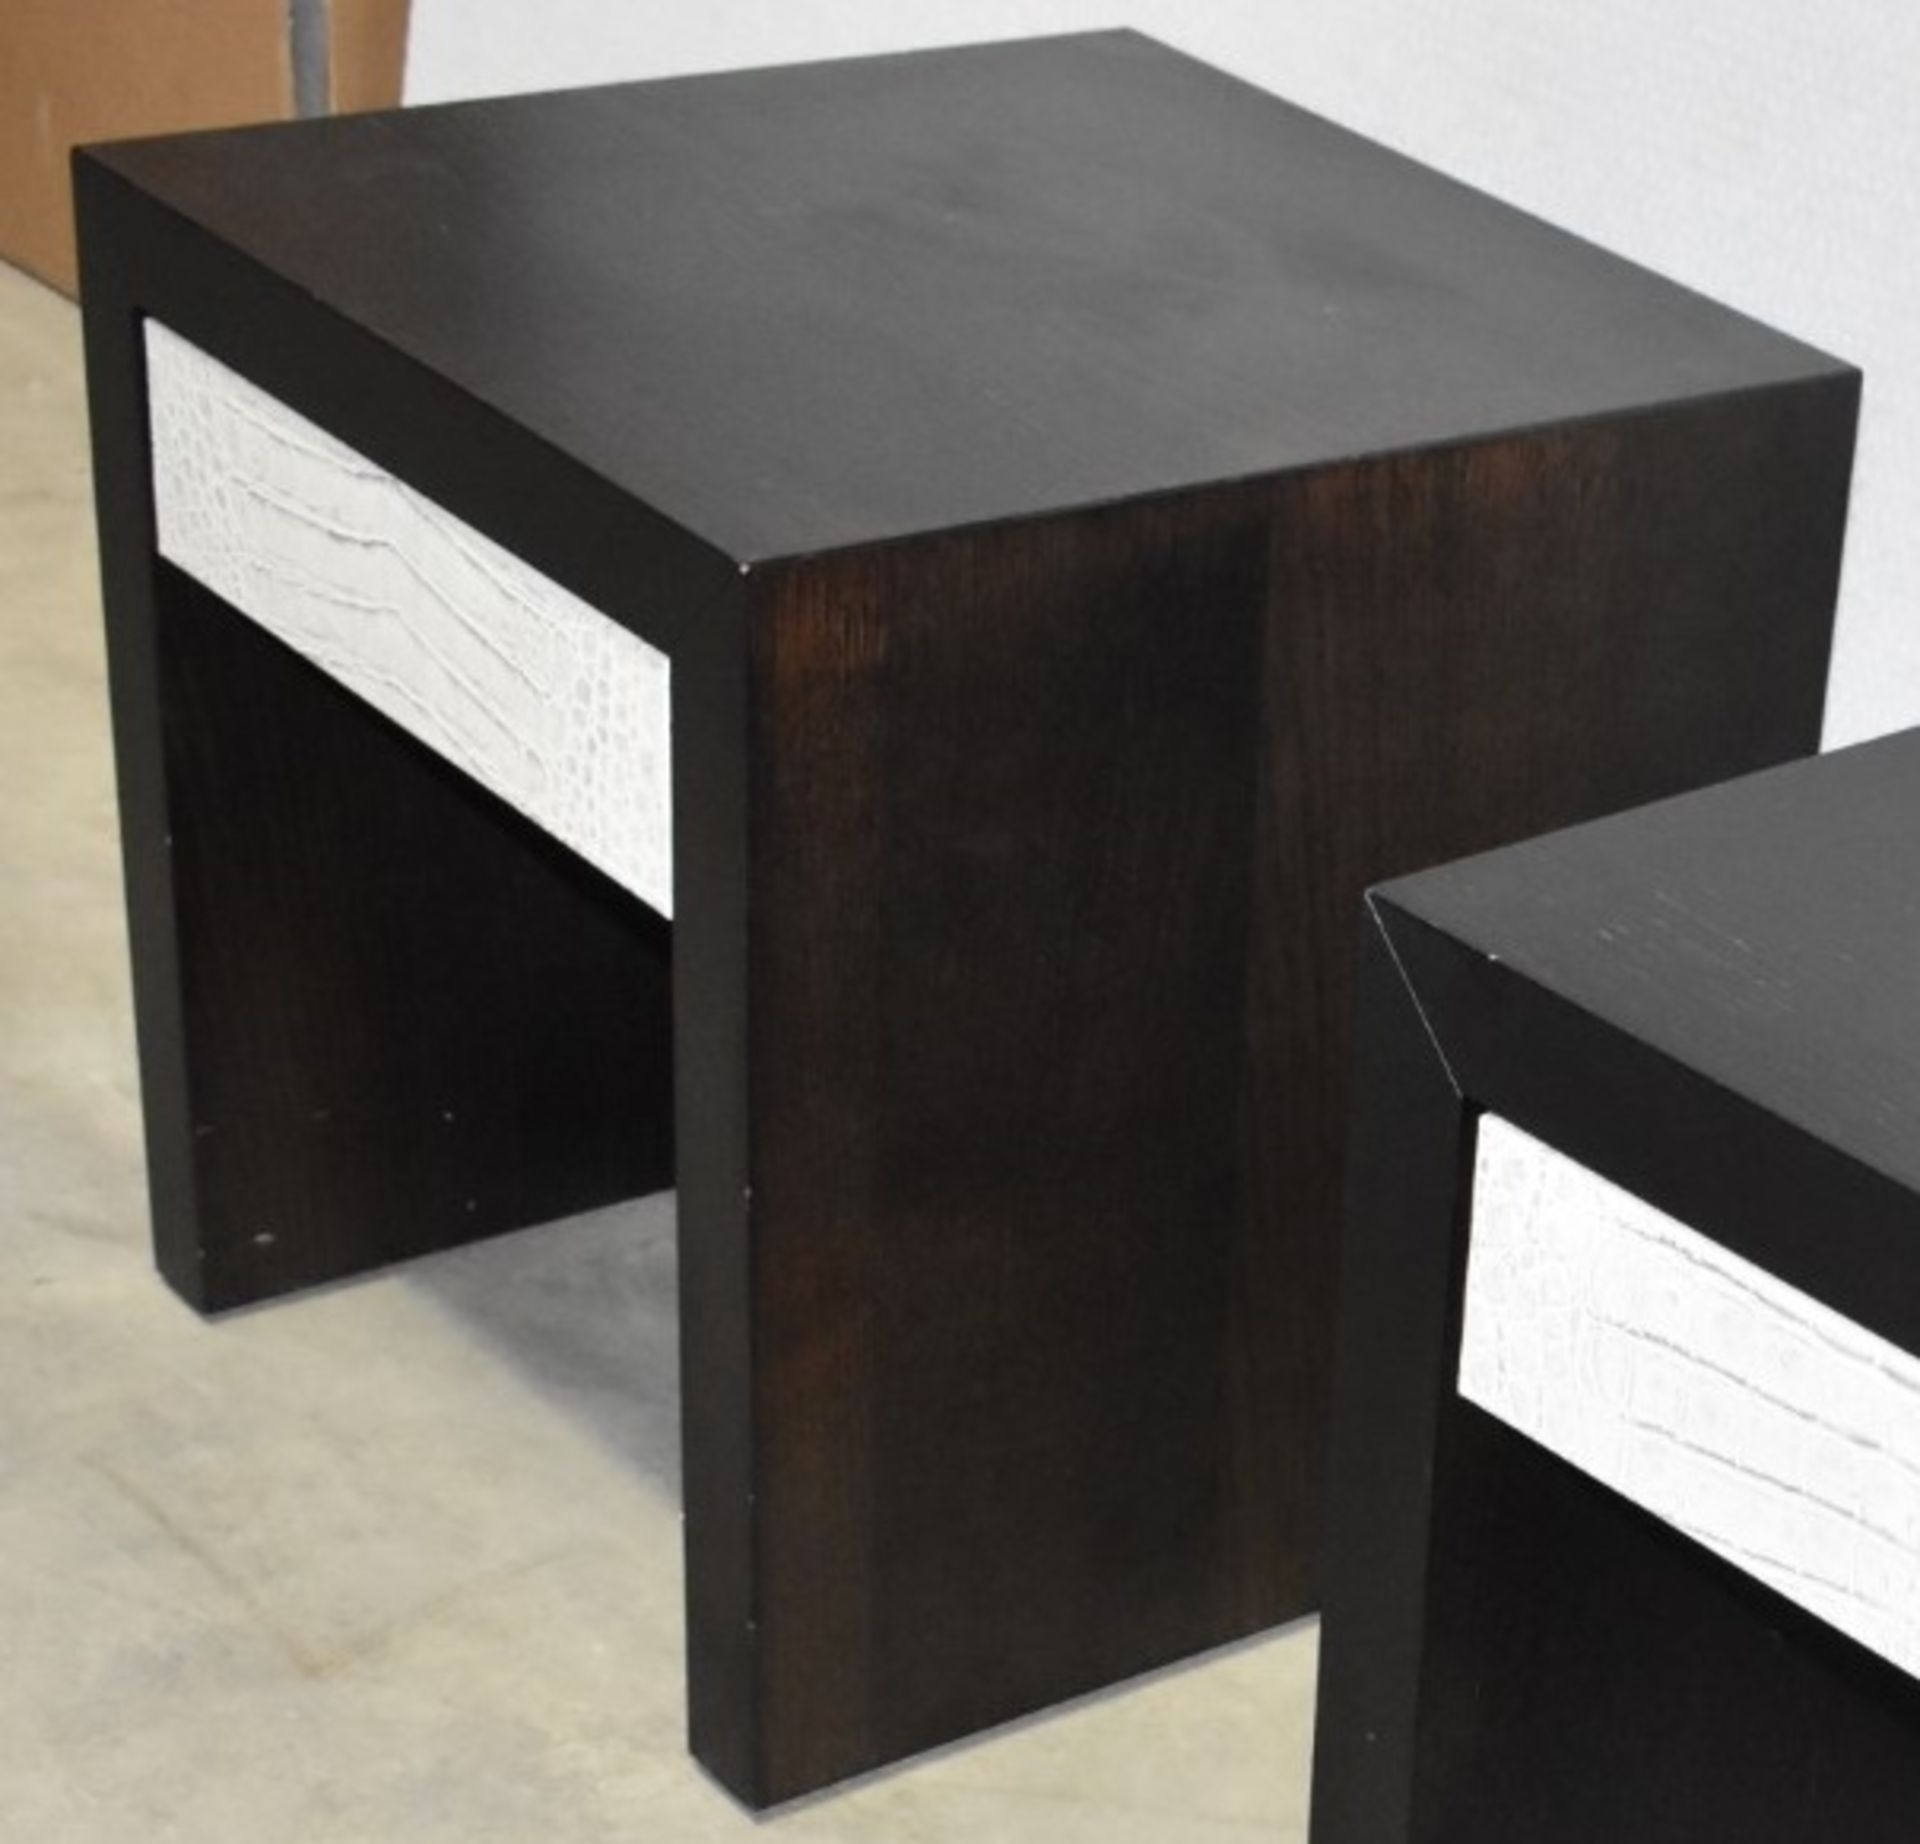 Pair of FENDI Modern Designer Wooden Bedside Cabinets Featuring Suede-style Lined 1-Drawer Storage - Image 4 of 15